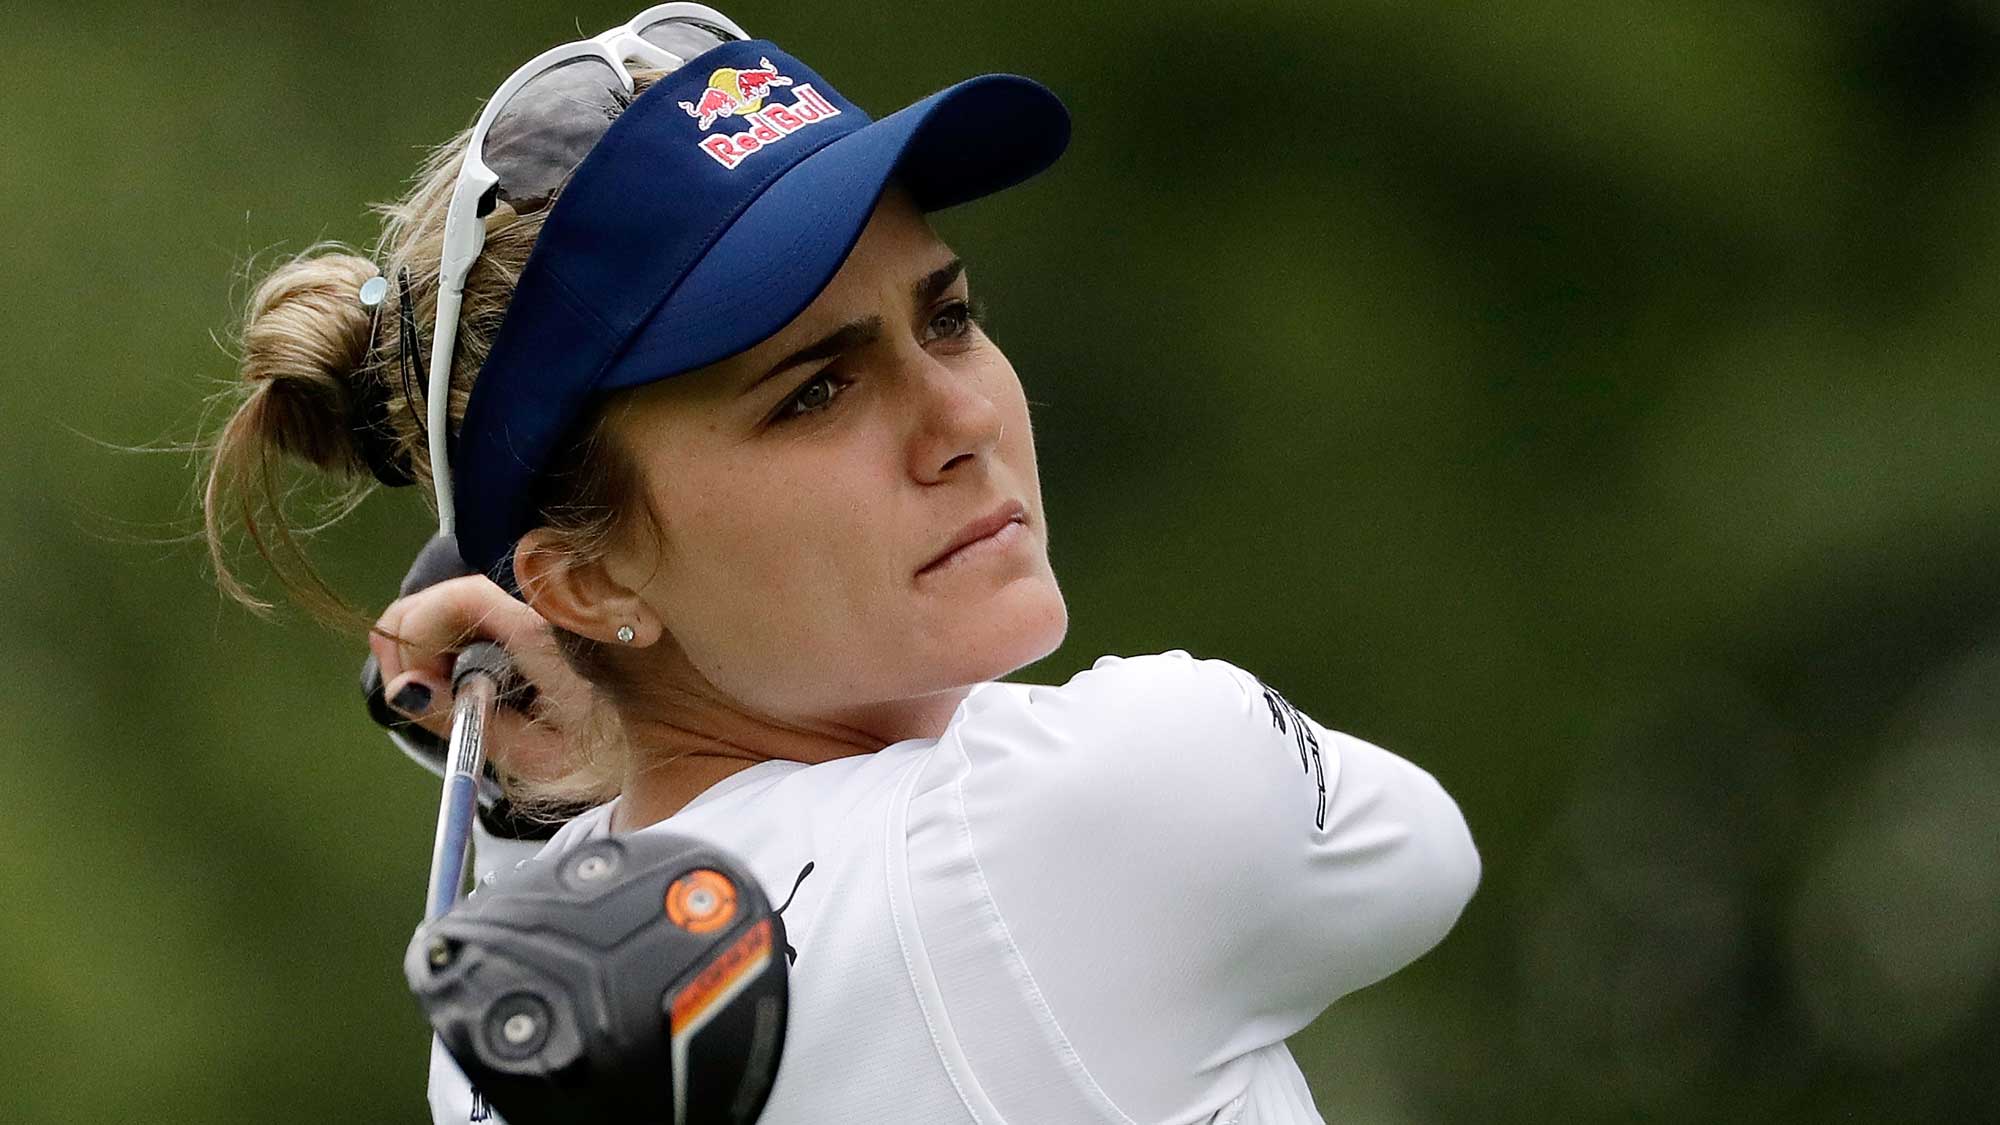 Lexi Thompson hits her tee shot on the sixth hole during a practice round prior to the 2017 KPMG PGA Championship